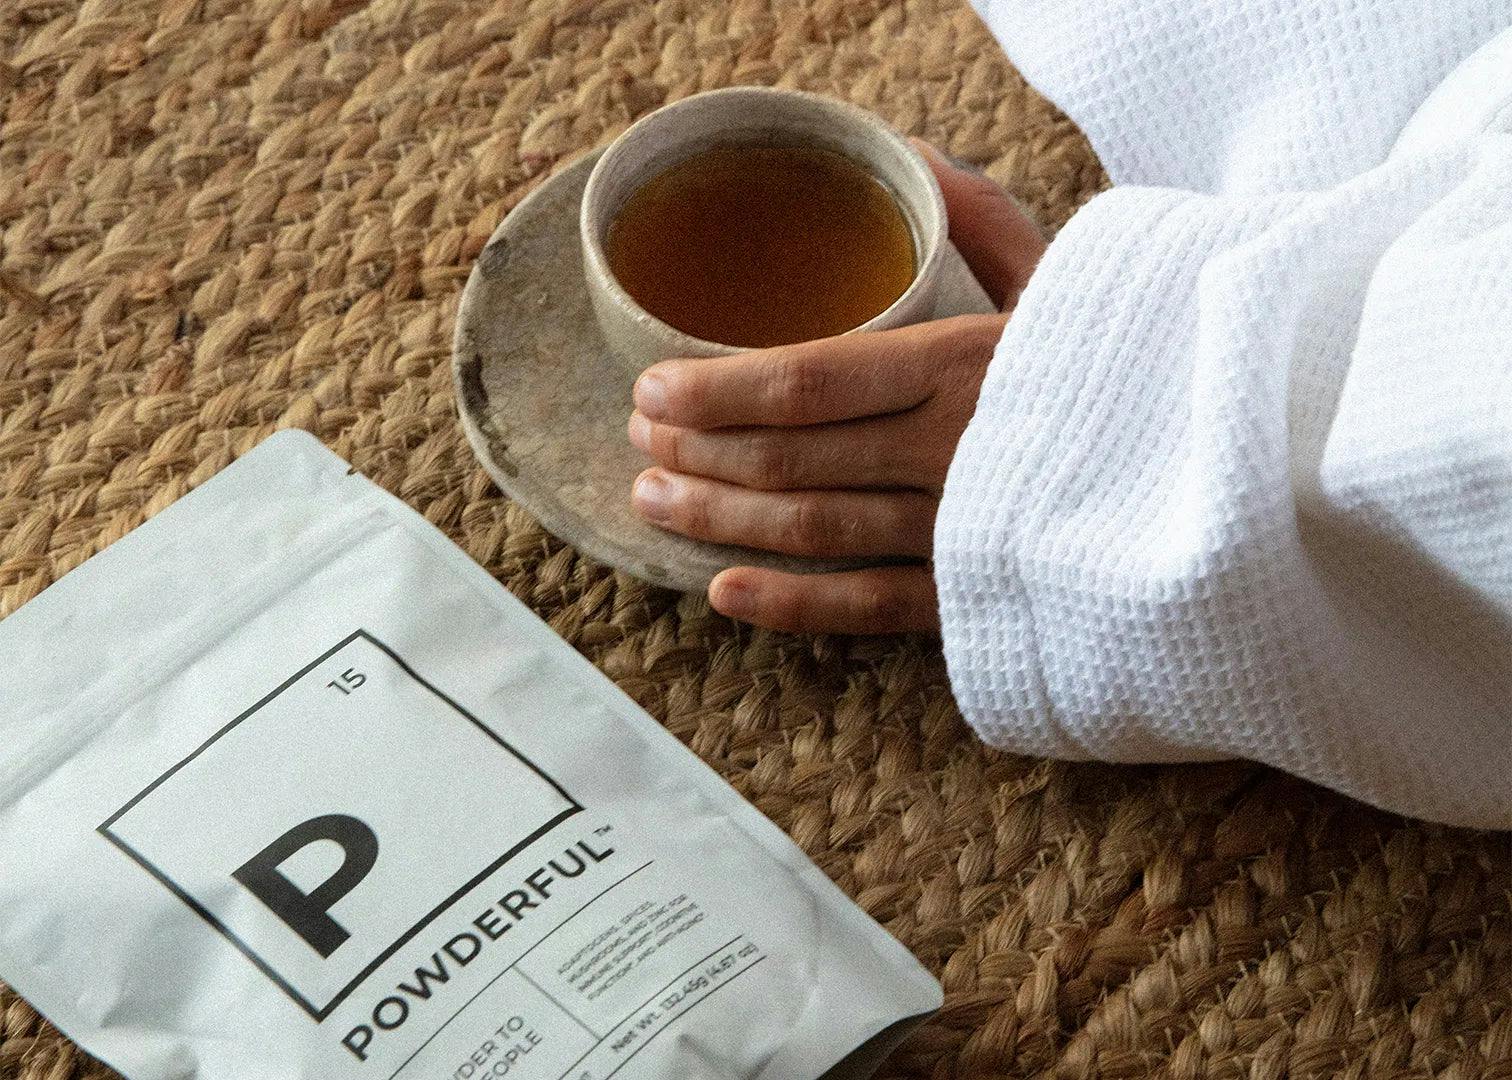 Explore Powderful: your one-scoop solution for daily wellness. Packed with Lion's Mane, Cordyceps, Ashwagandha, Holy Basil, and Zinc, our blend promotes energy, focus, gut health, skin health, immunity, and calmness. Caffeine-free, vegan, natural, and deliciously crafted for optimal well-being.